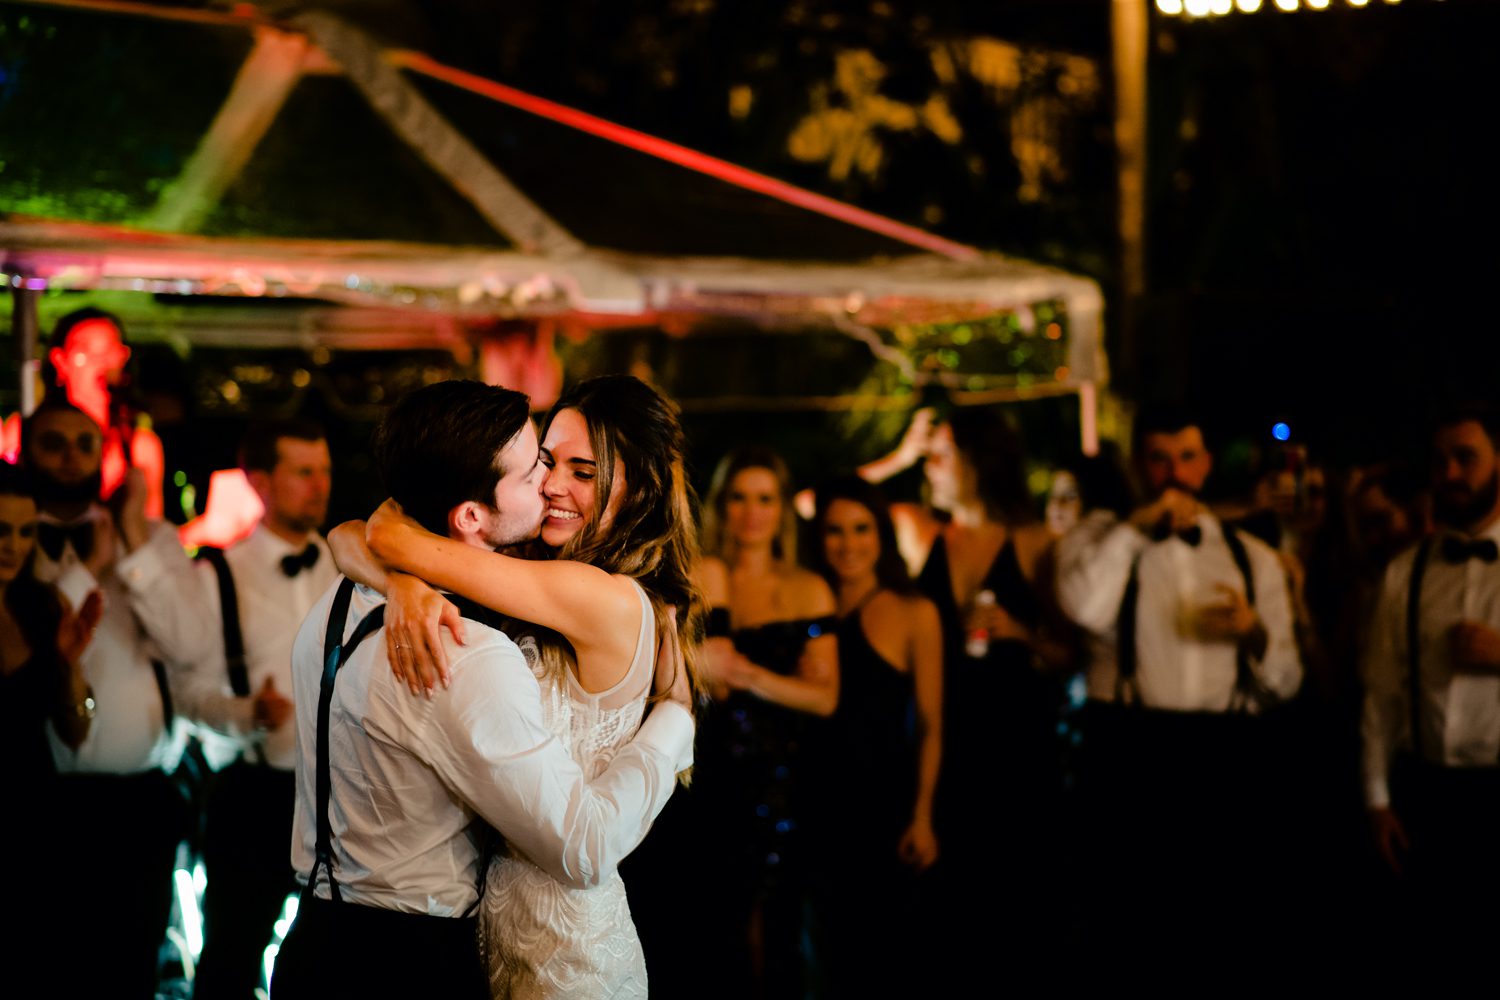 Shana and Patrick hugging during their first dance at Hemingway House Weddings.